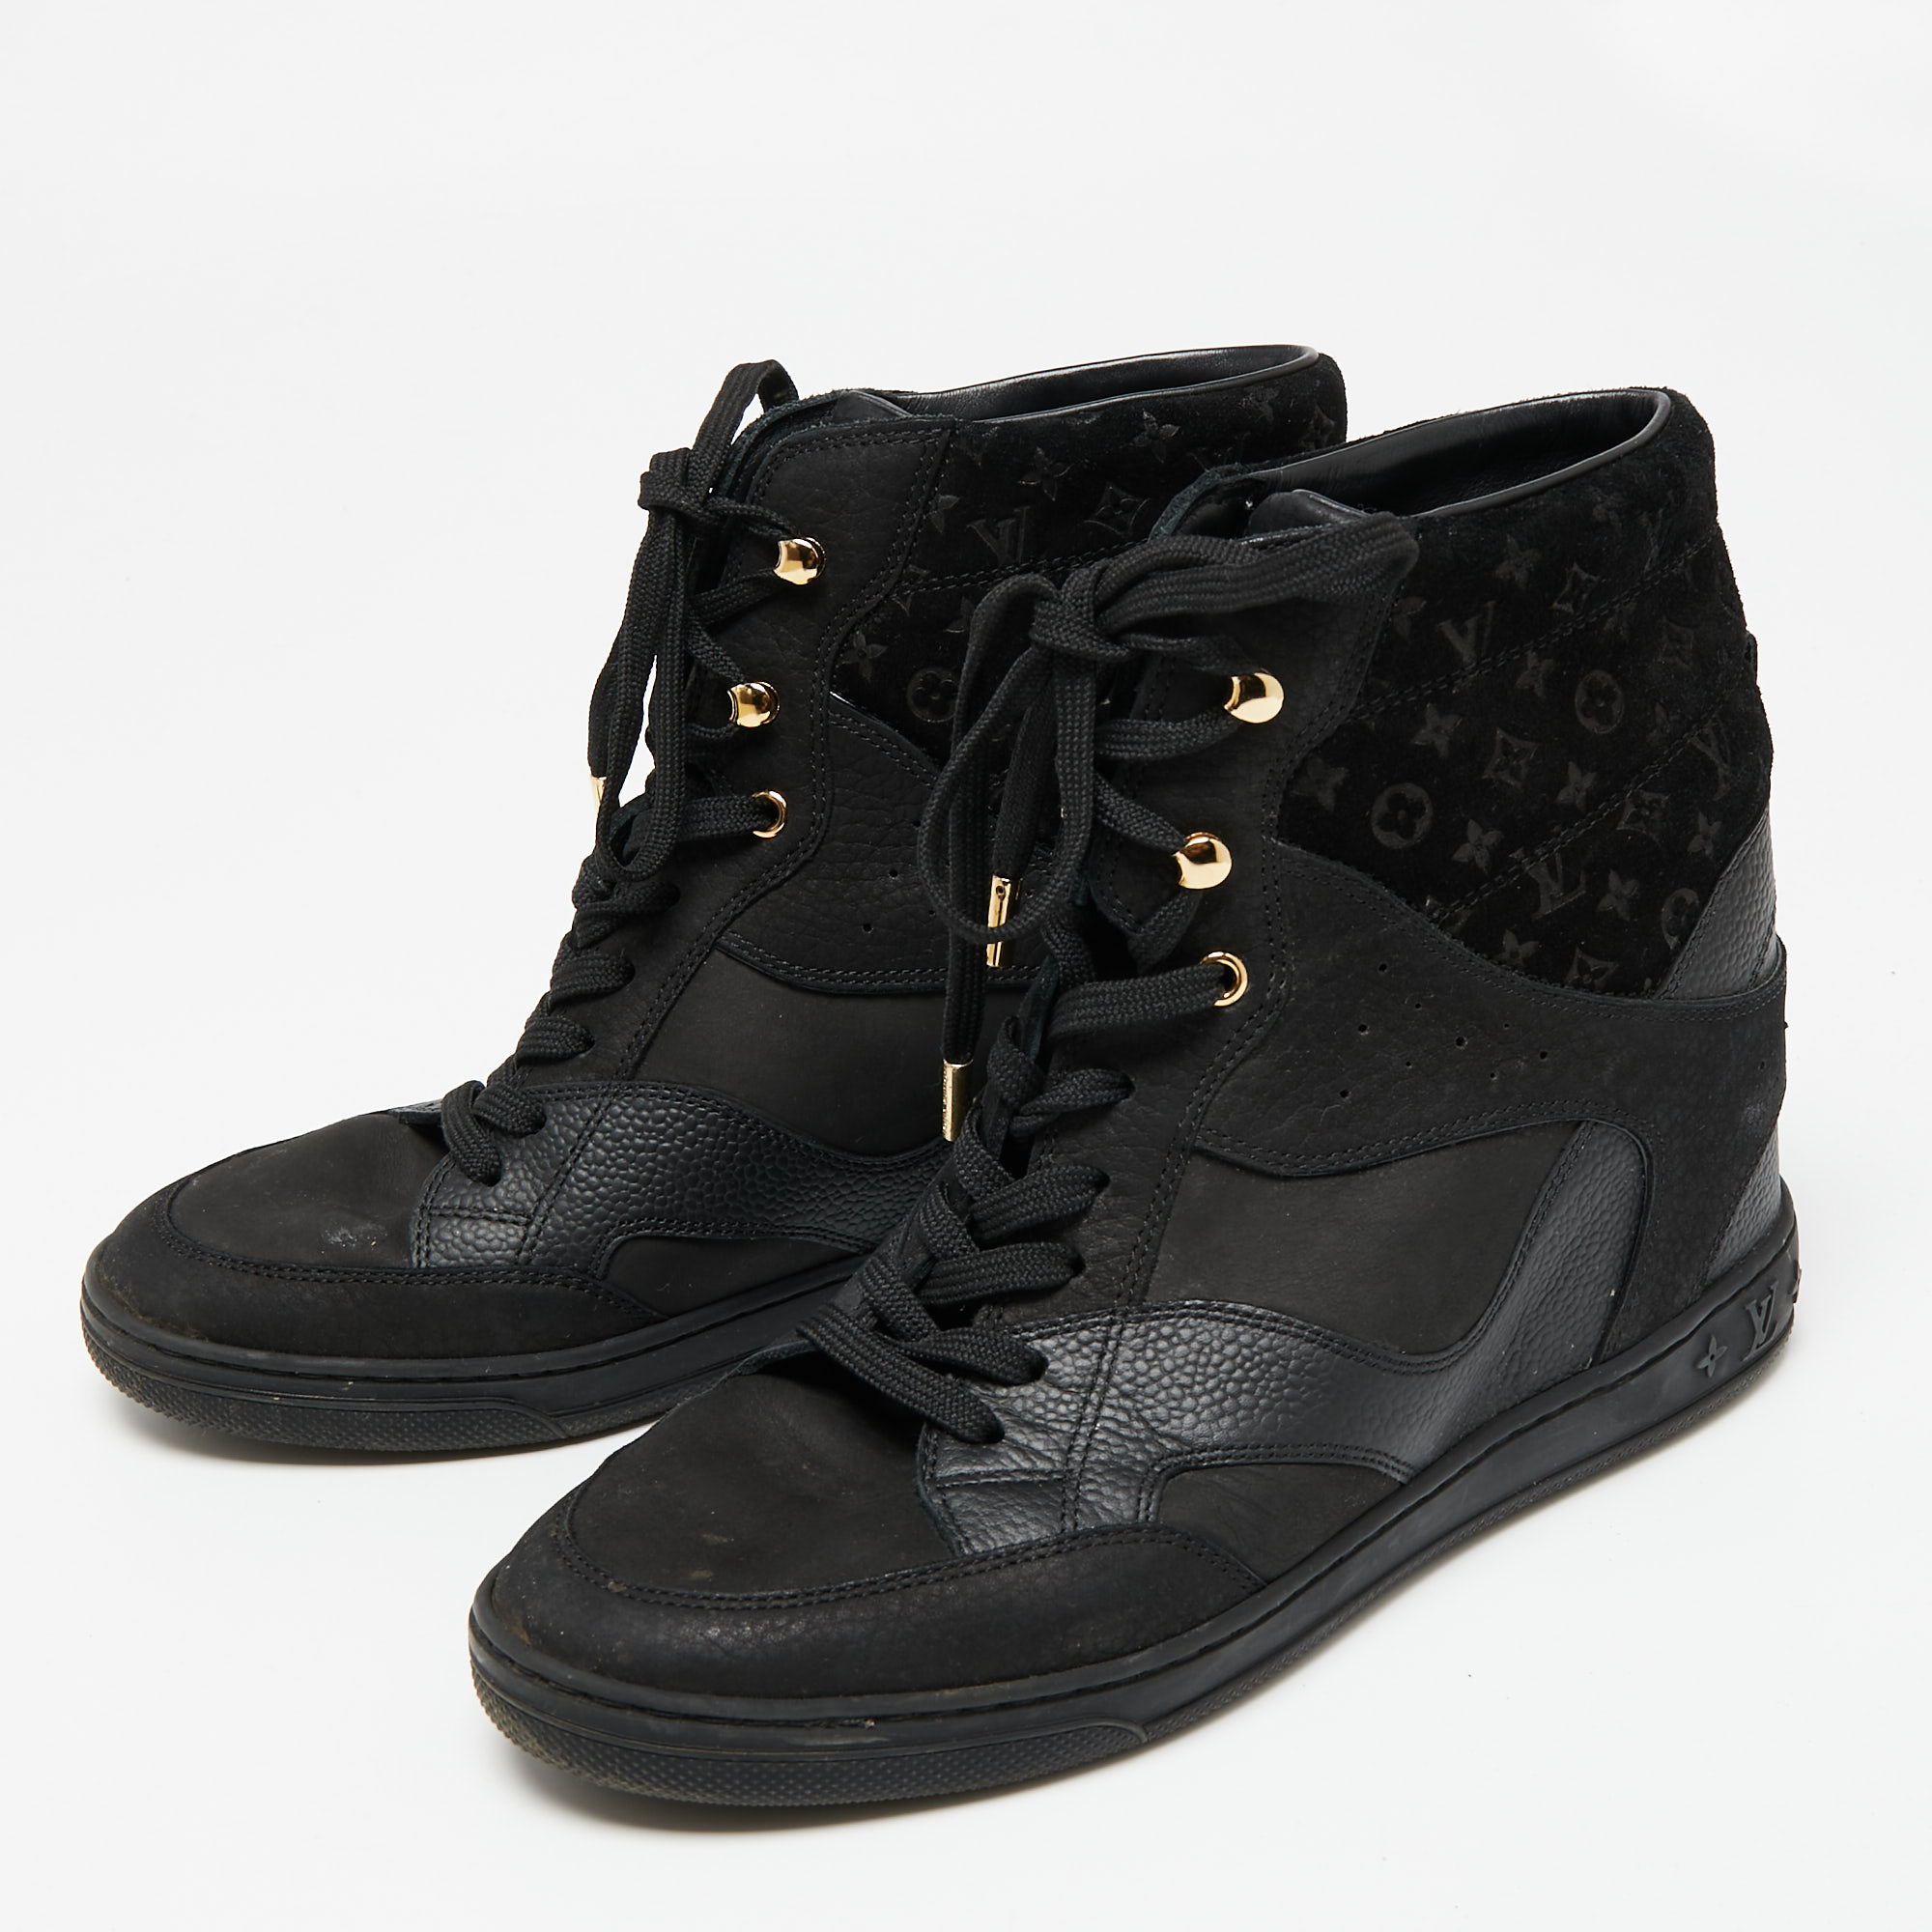 

Louis Vuitton Black Leather and Embossed Monogram Suede Millenium Wedge High-Top Sneakers Size